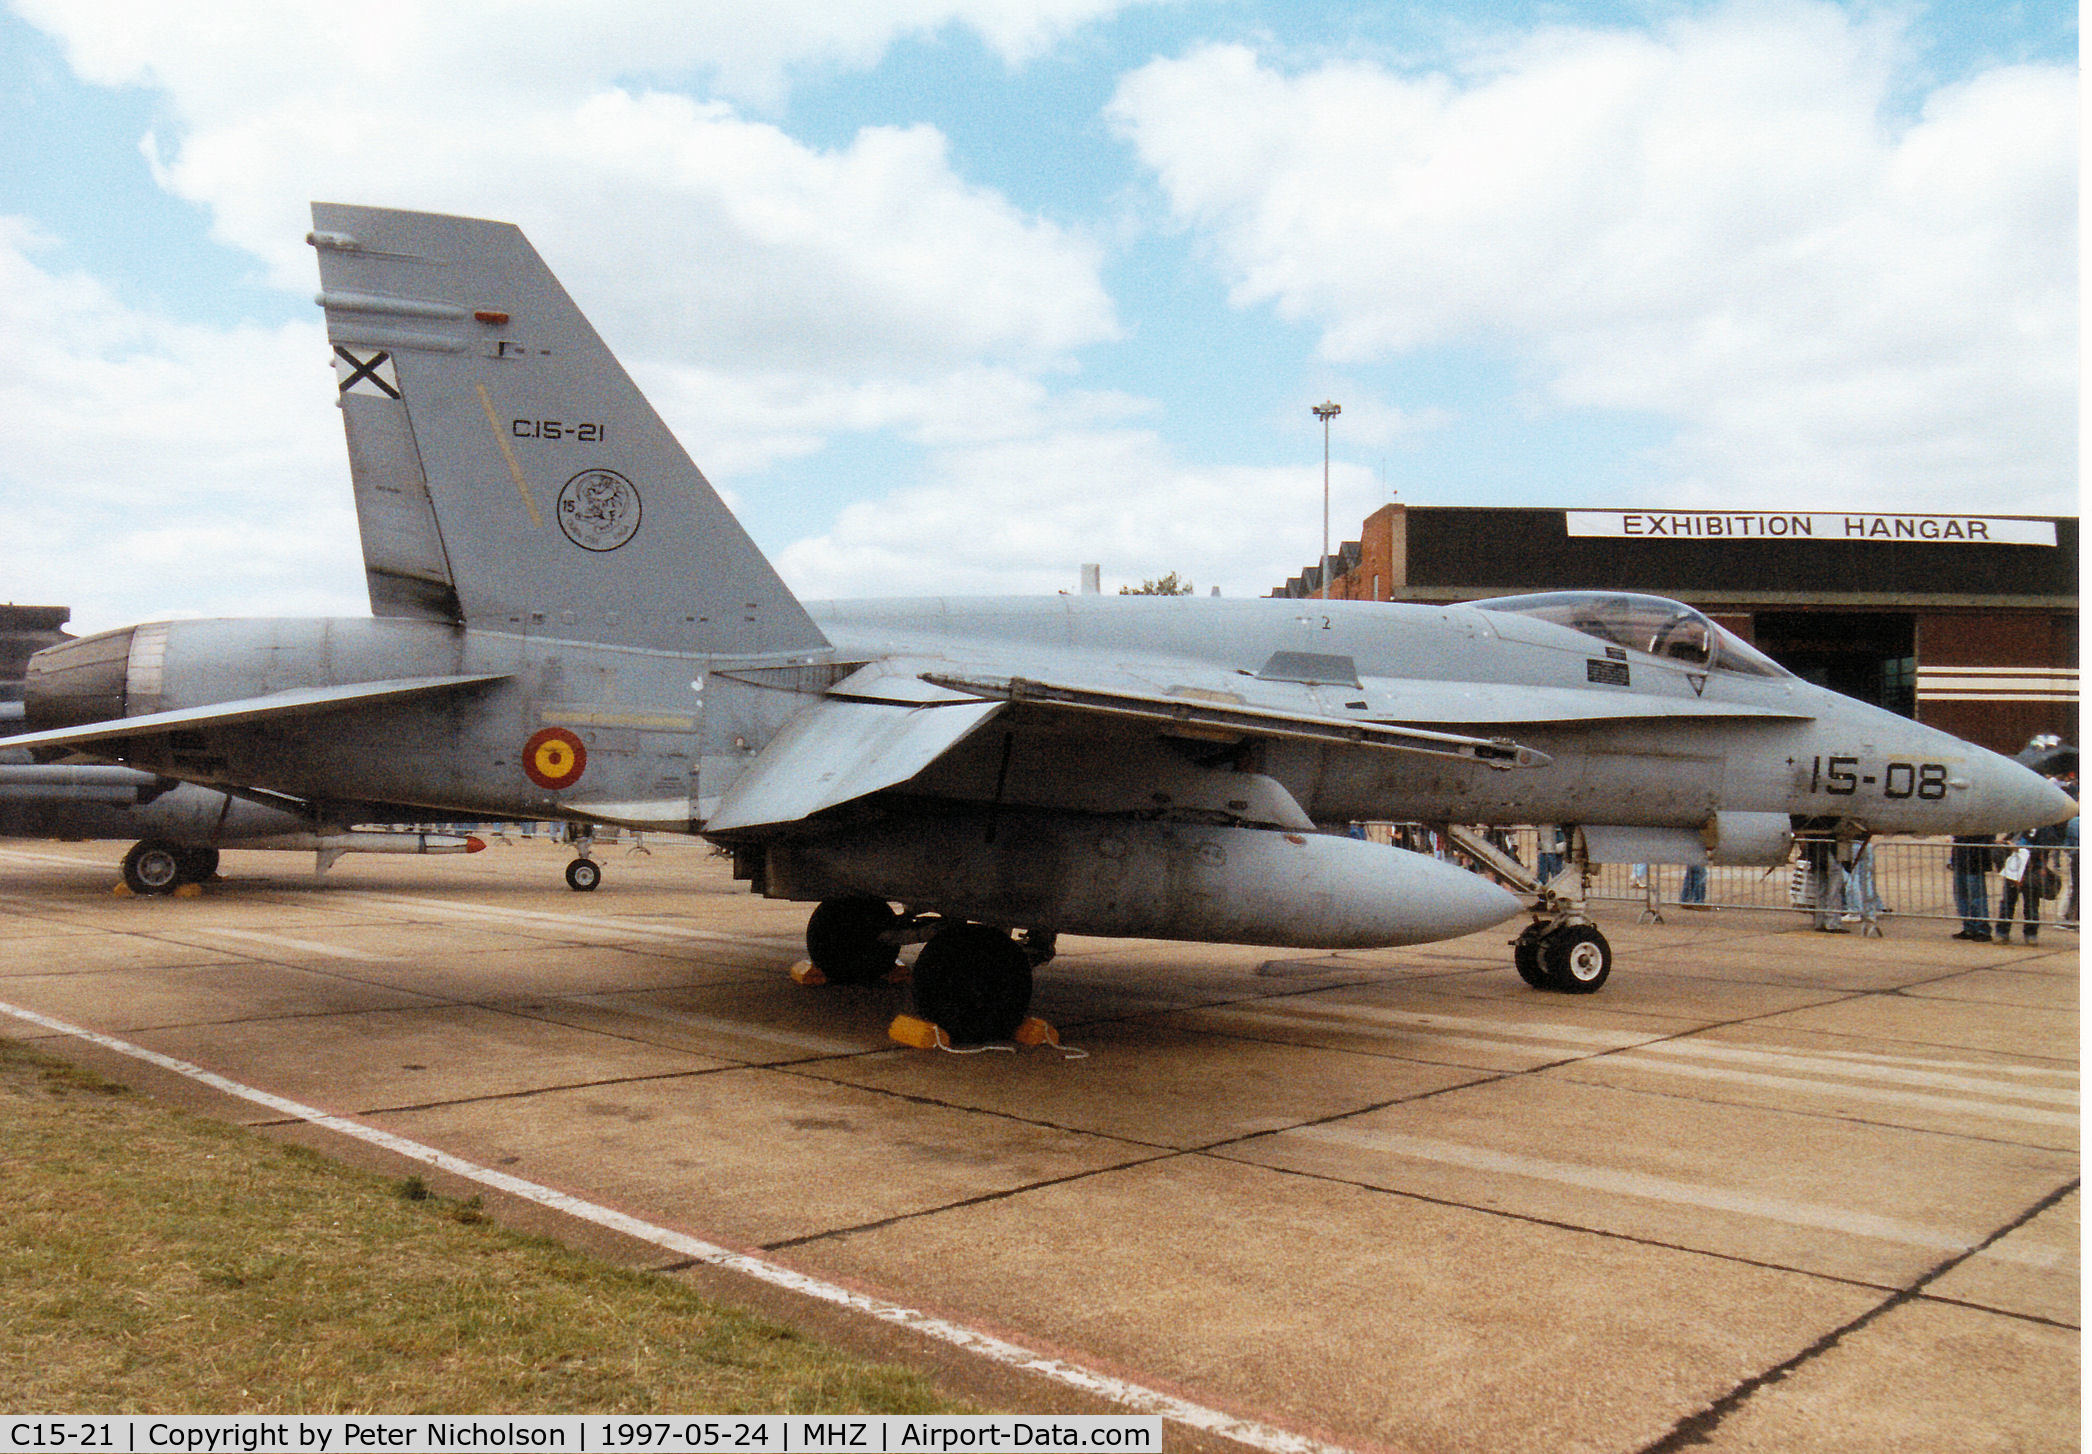 C15-21, McDonnell Douglas EF-18A Hornet C/N 0565/A472, EF-18A Hornet, callsign AME 1505, of the Spanish Air Force's Ala 15 on display at the 1997 RAF Mildenhall Air Fete.